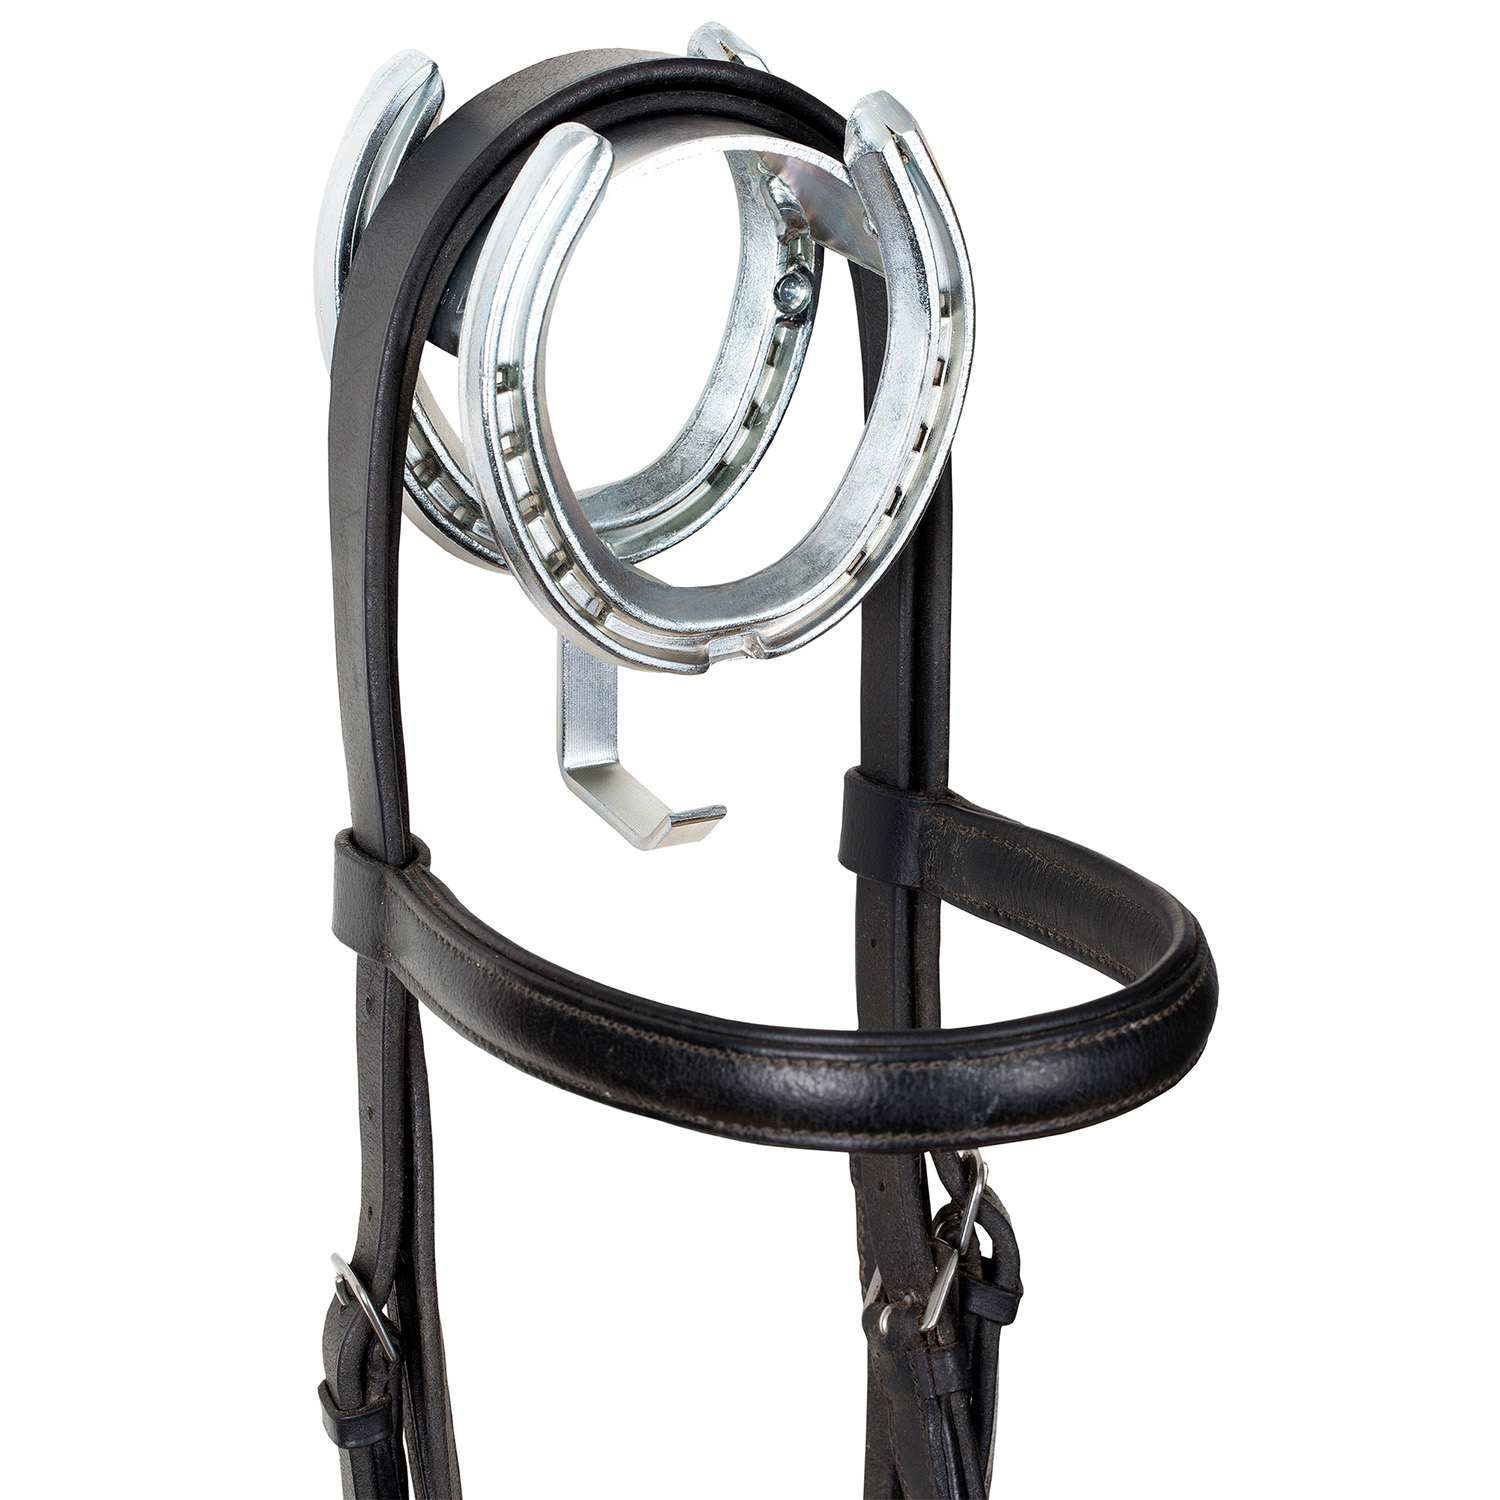 STUBBS BRIDLE KING BRIGHT ZINC PLATED S2070Z